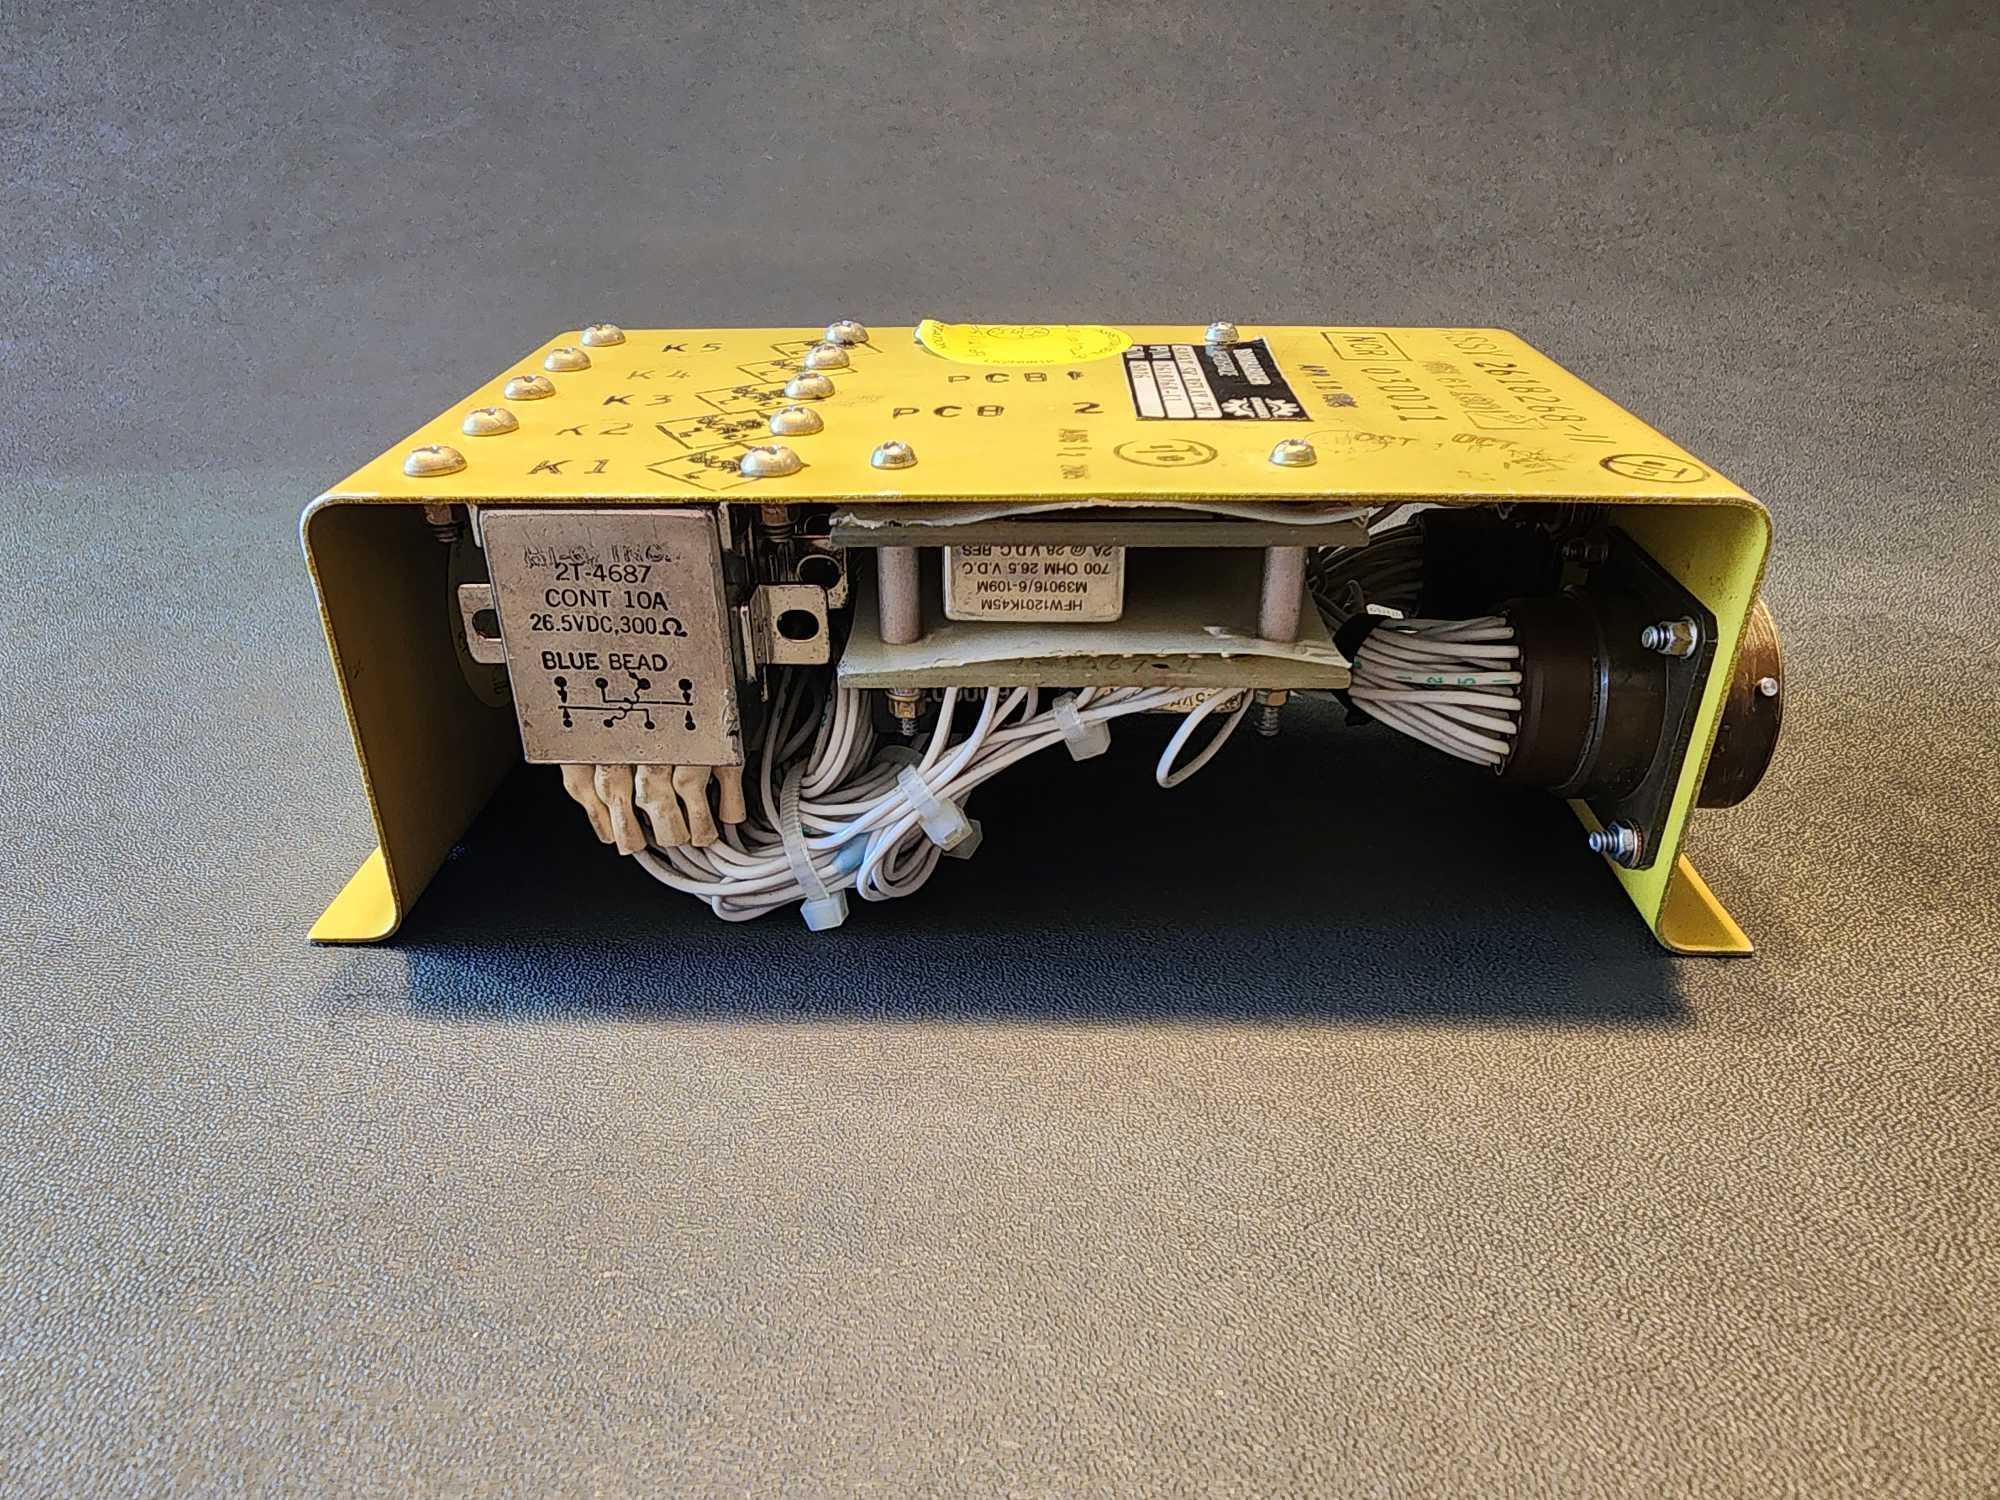 LEARJET SQUAT SWITCH RELAY PANEL 2618268-11 (INSPECTED) S/N 5026